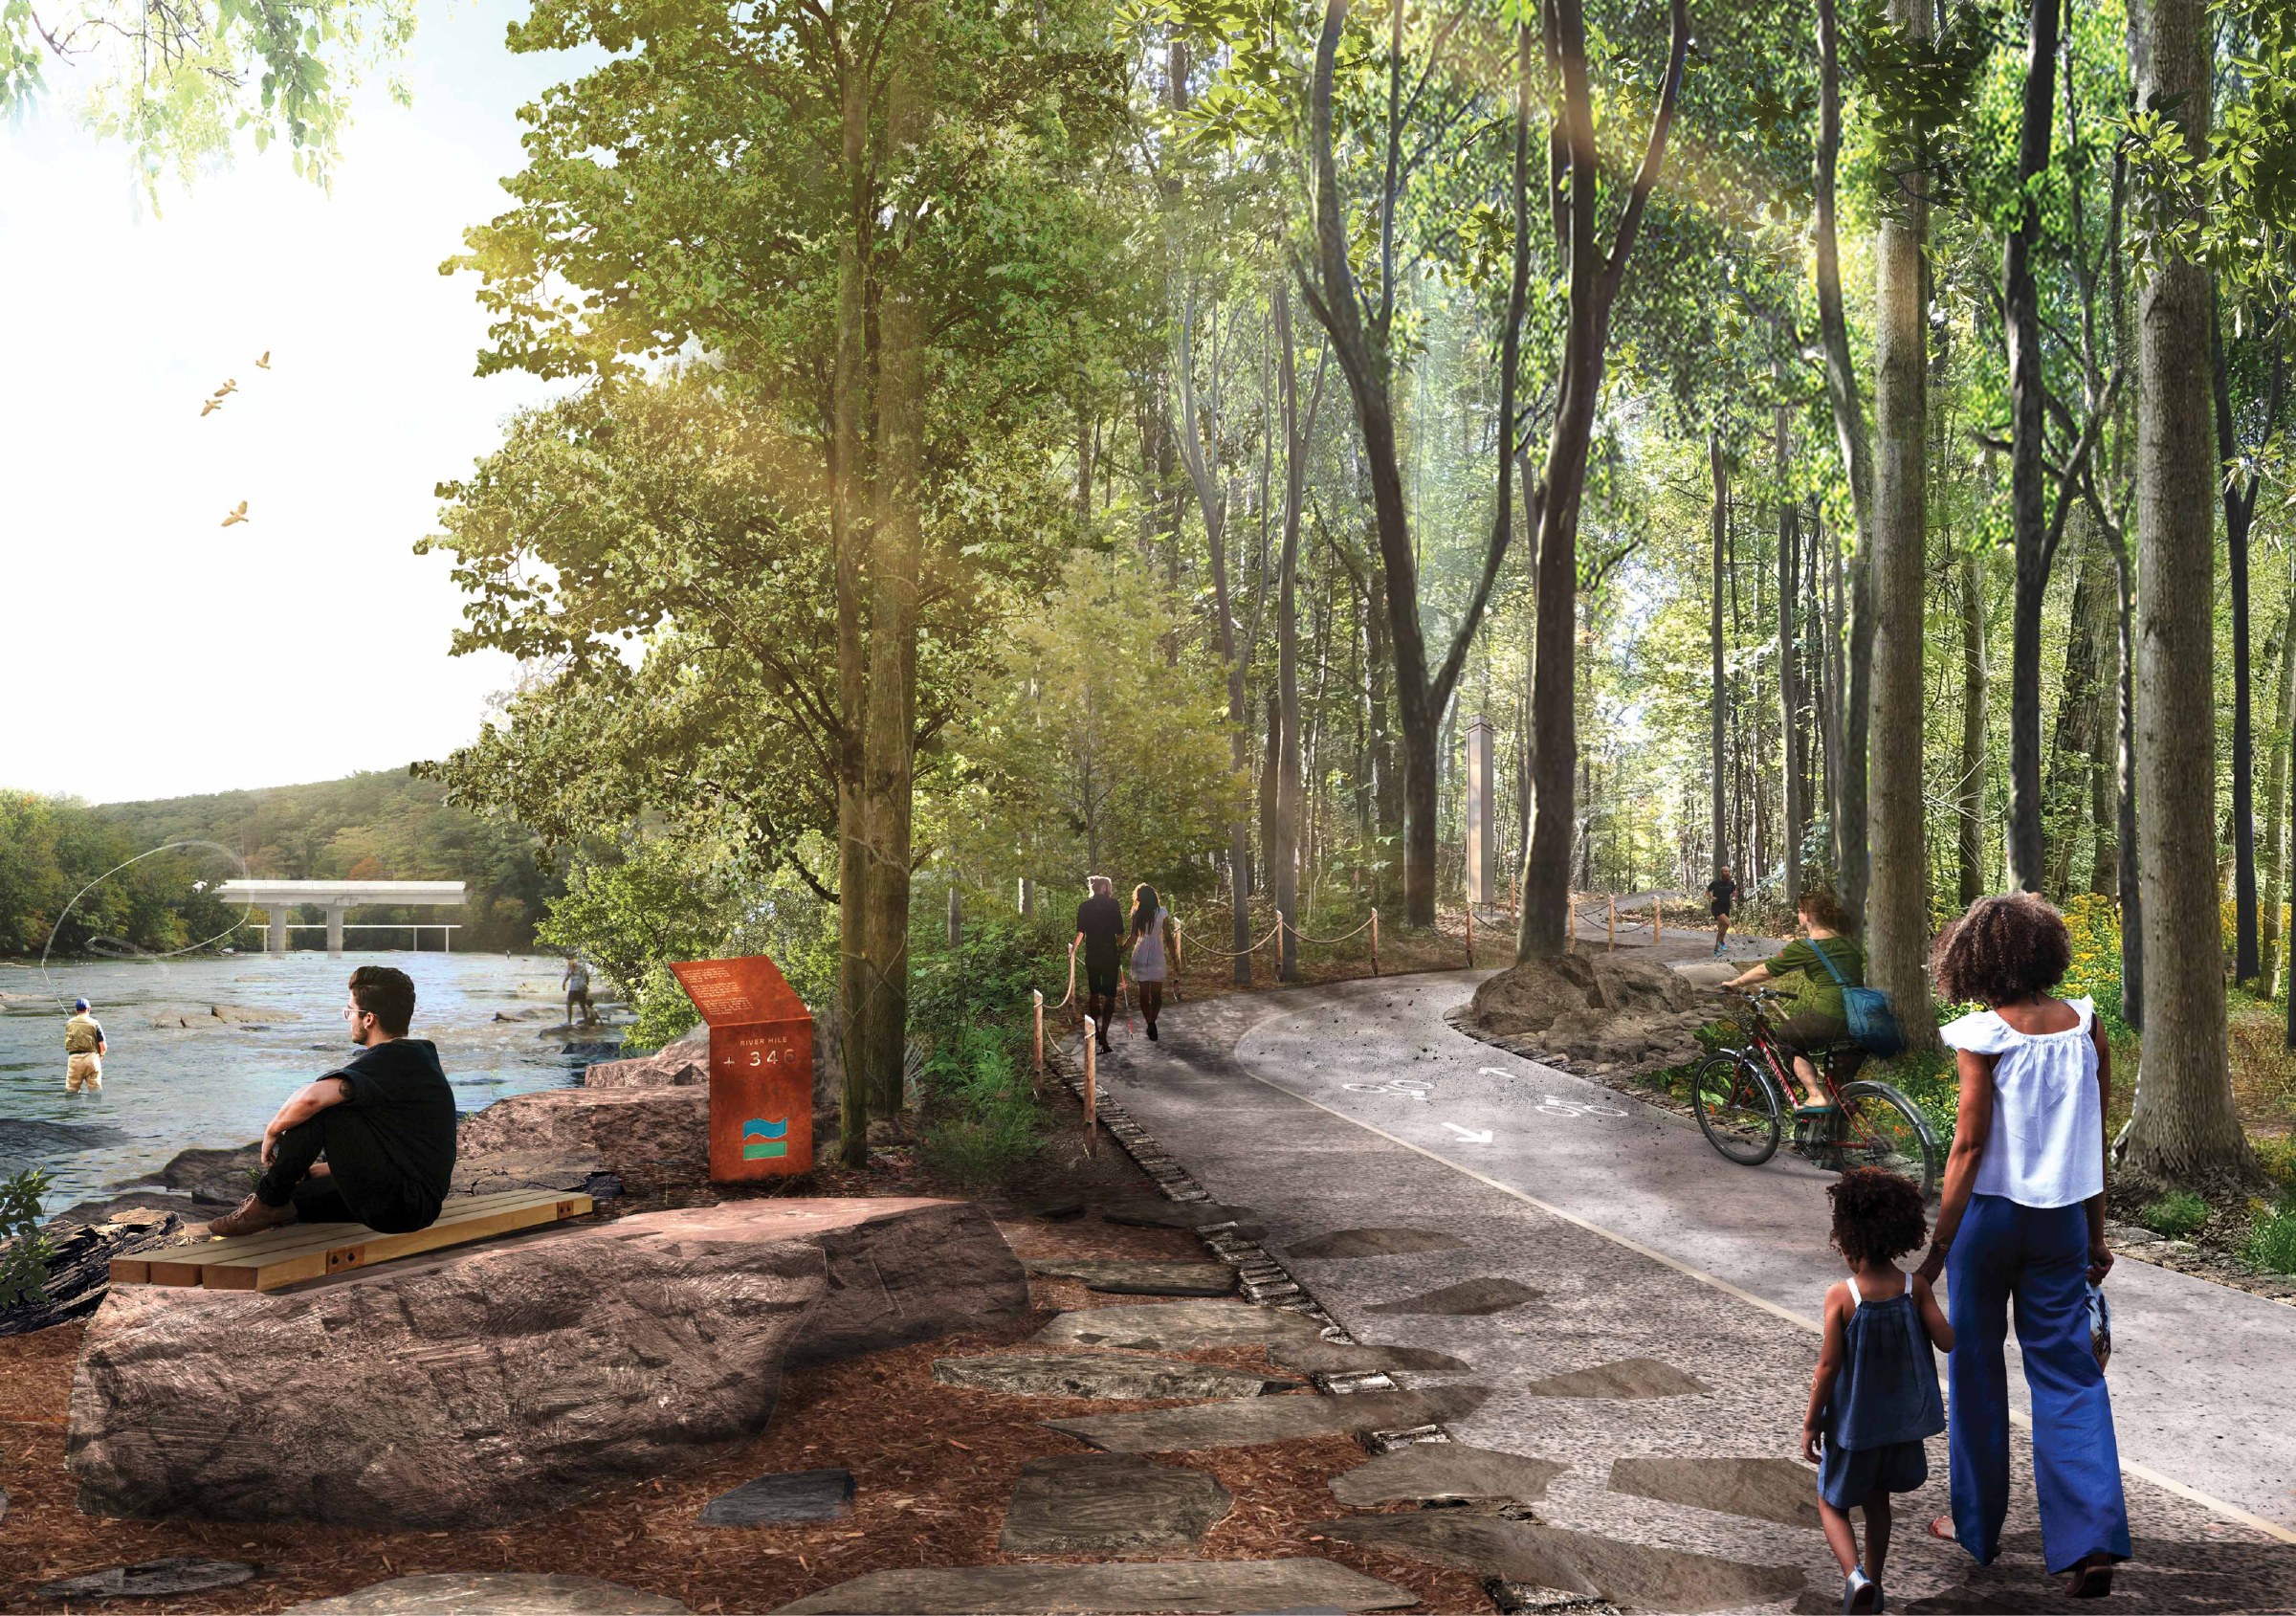 Digital perspective drawing of a walking-biking path on the right side, meandering through tall, lush trees, and the serene Chattahoochee River with large rocks at the water's edge to sit on, shown on the left side of the frame.